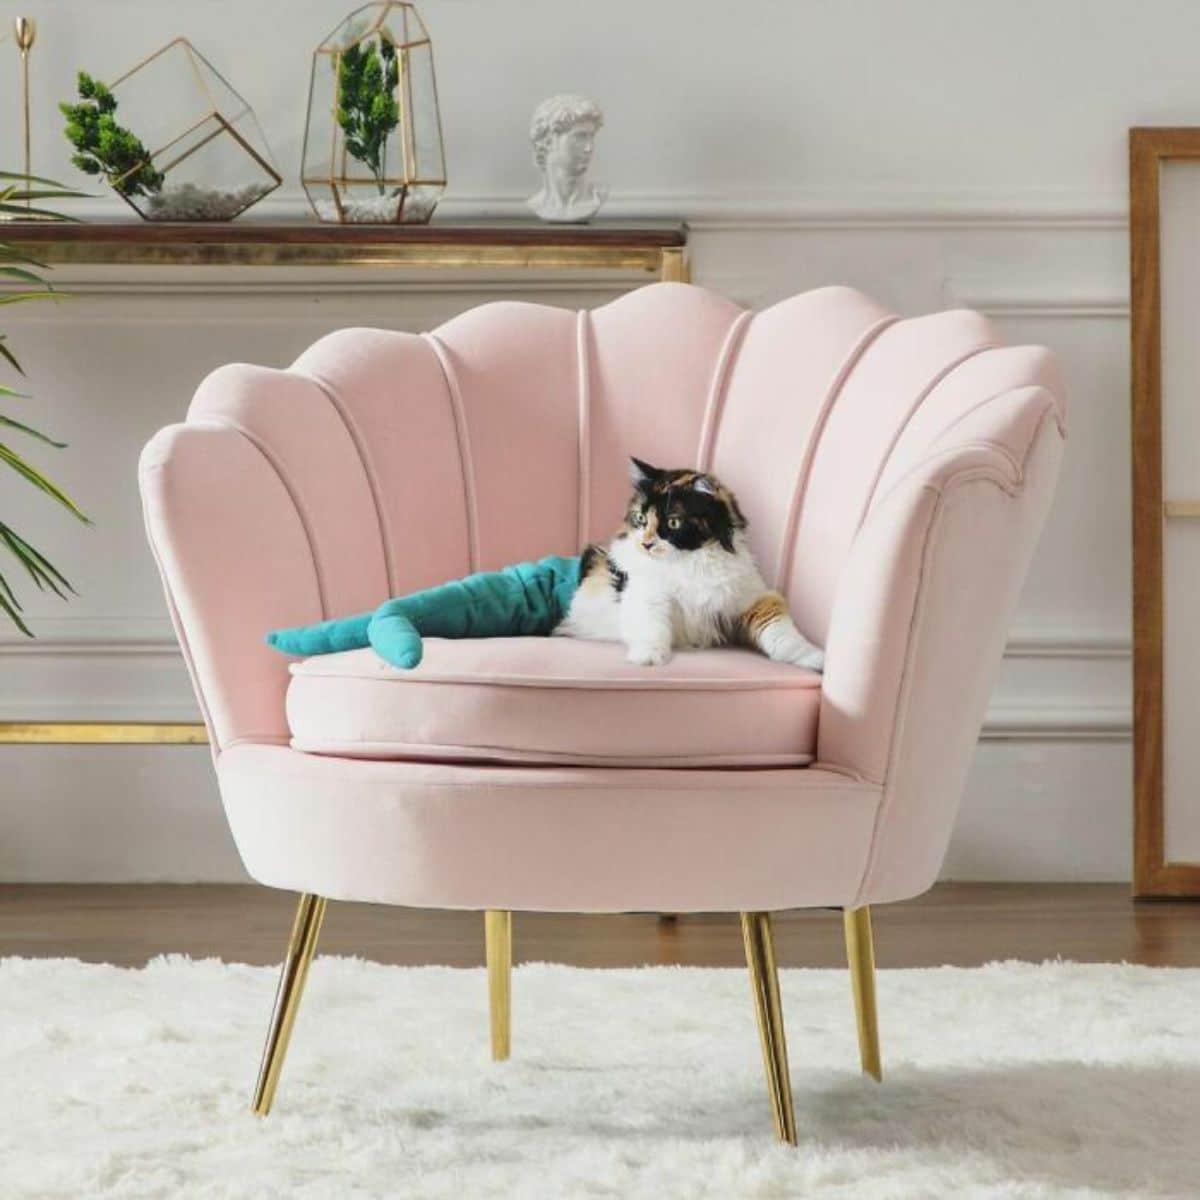 white black and orange cat wearing a blue mermaid tail laying on a pastel pink seashell chair